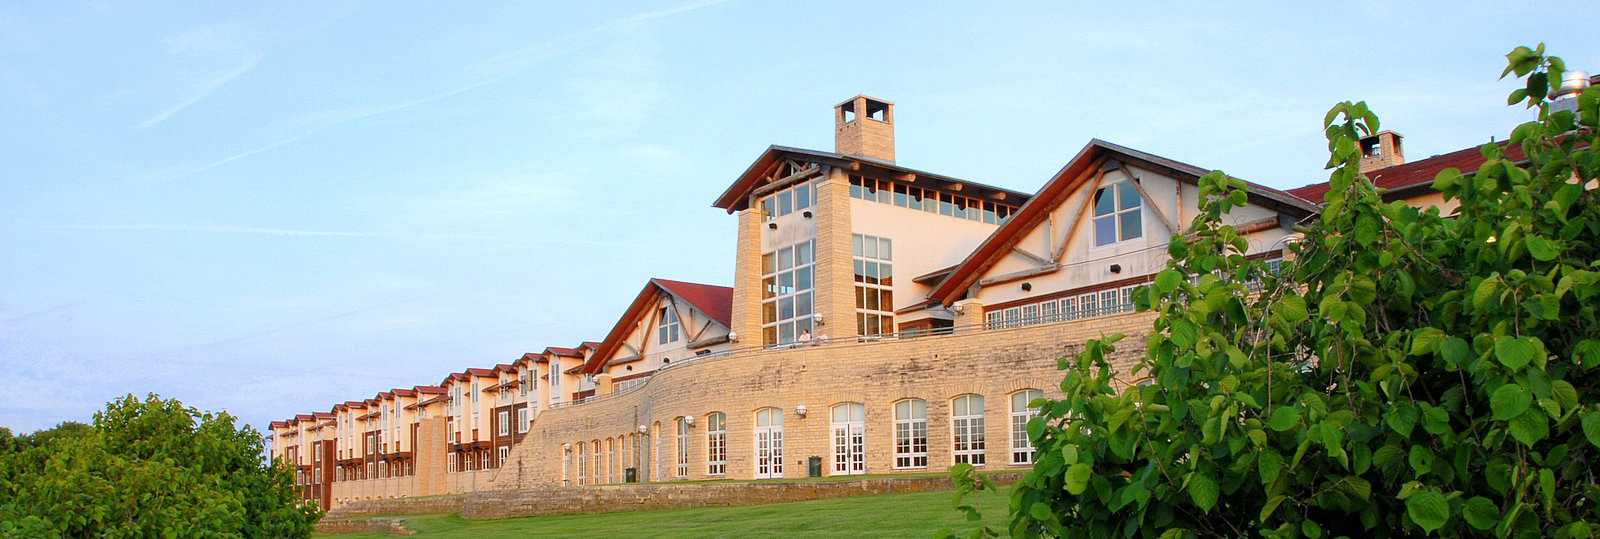 Lied Lodge & Conference Center